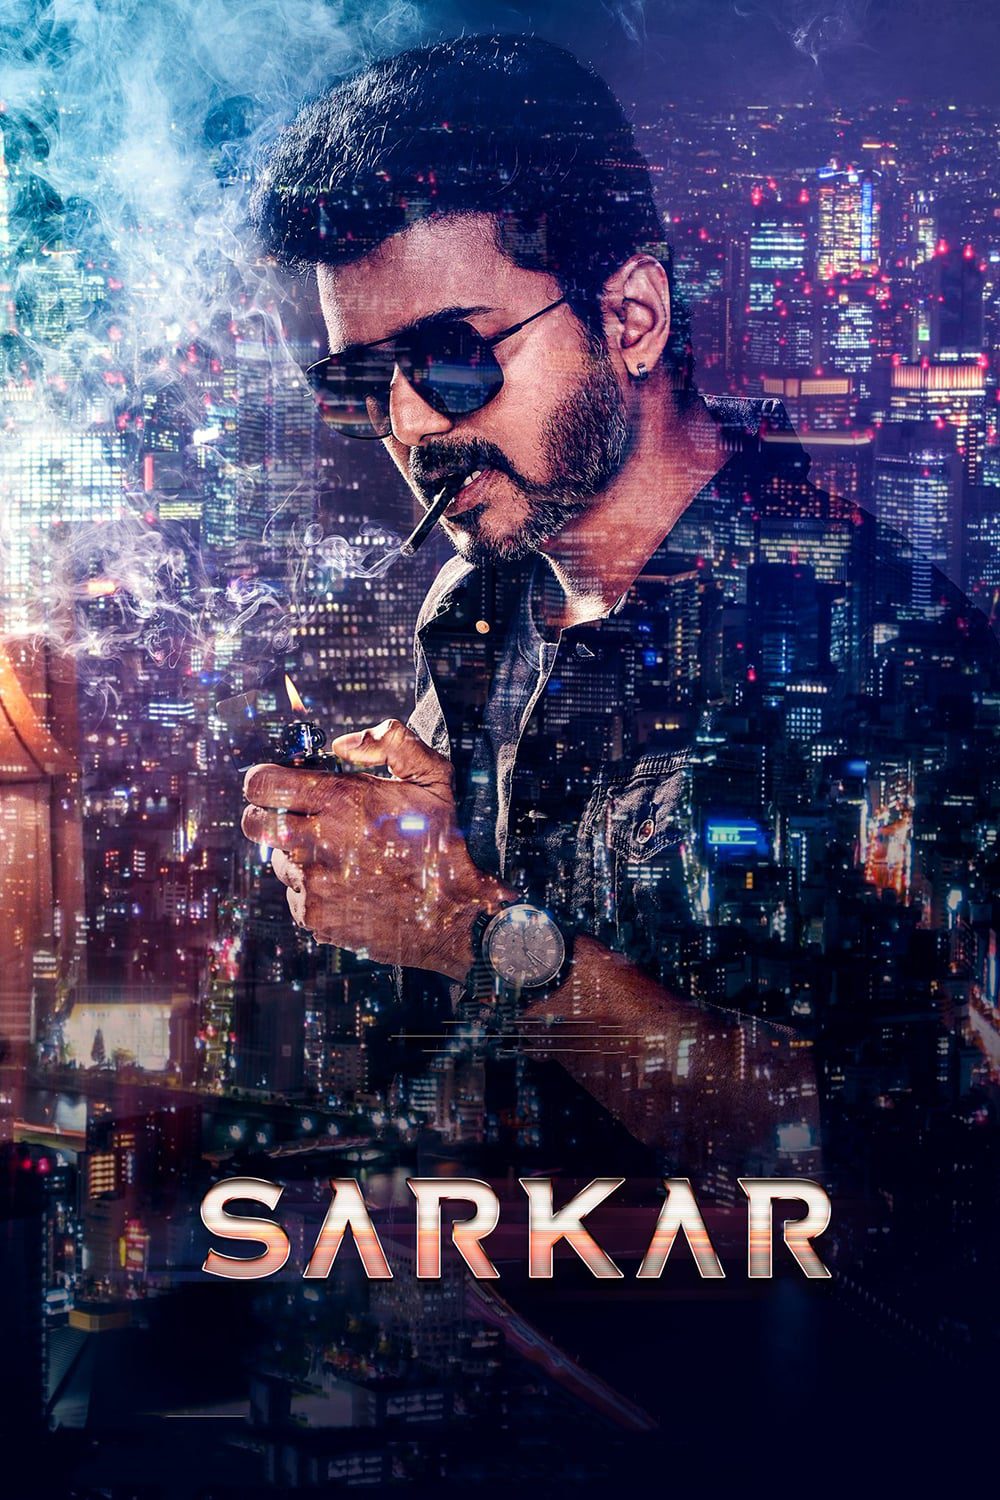 Poster for the movie "Sarkar"